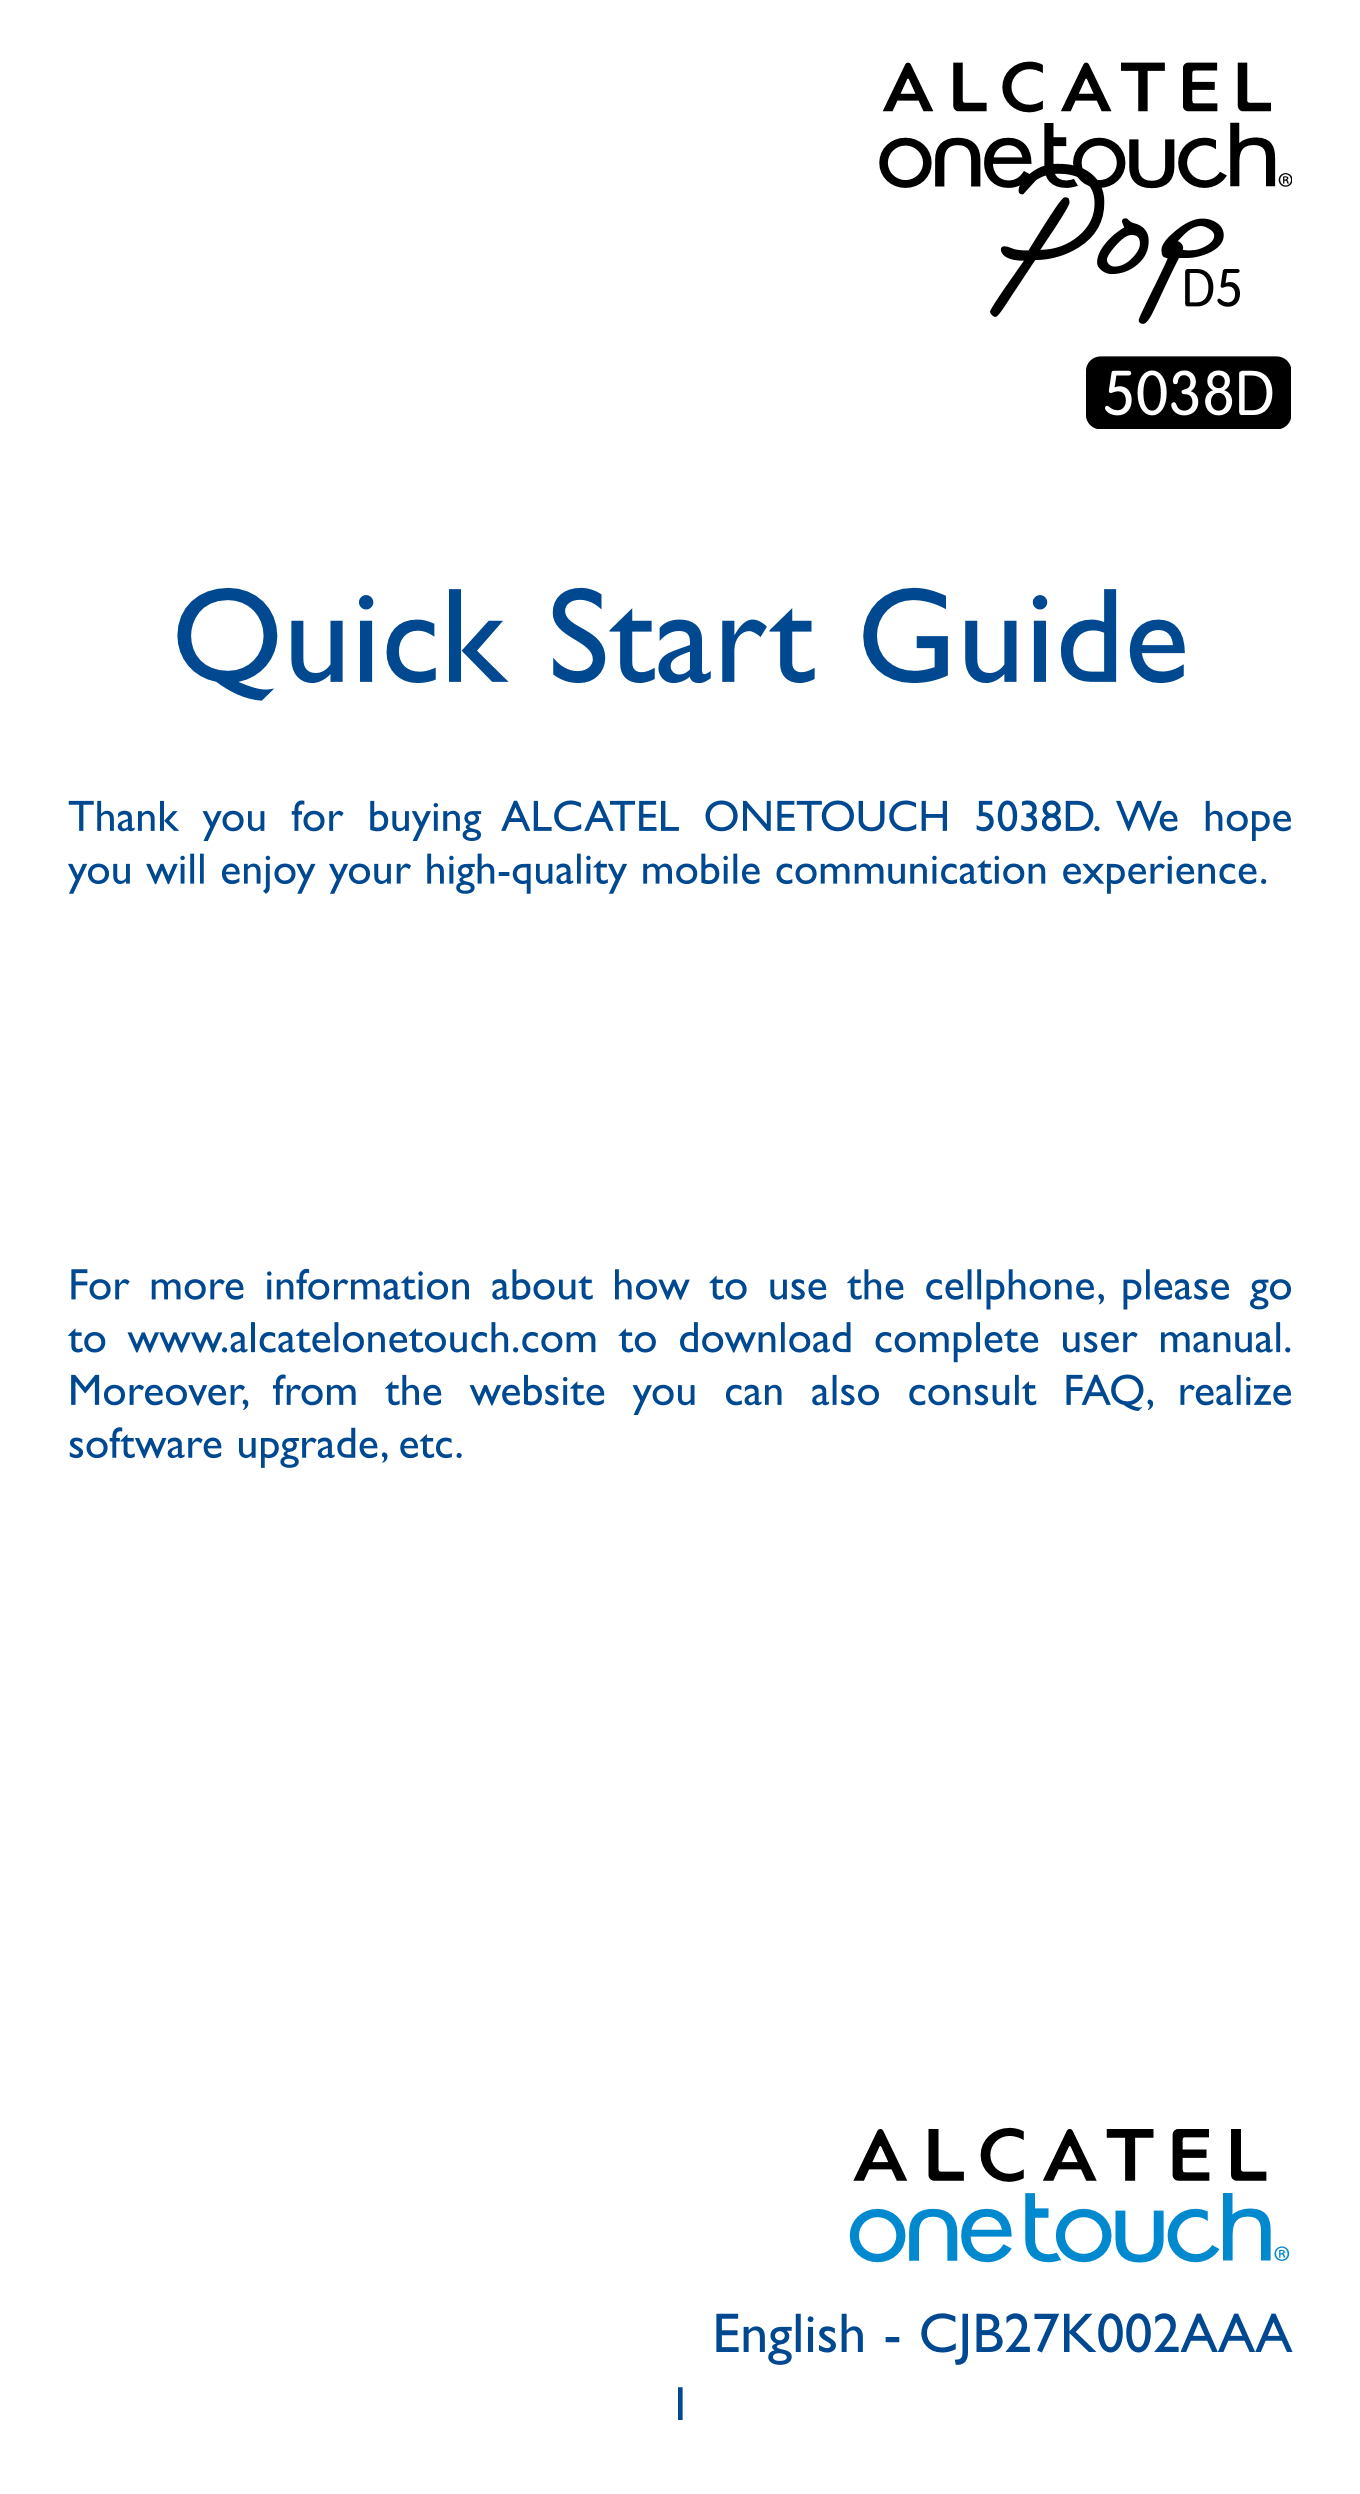 Quick Start Guide
Thank you for buying ALCATEL ONETOUCH 5038D. We hope 
you will enjoy your high-quality mobile communication ex